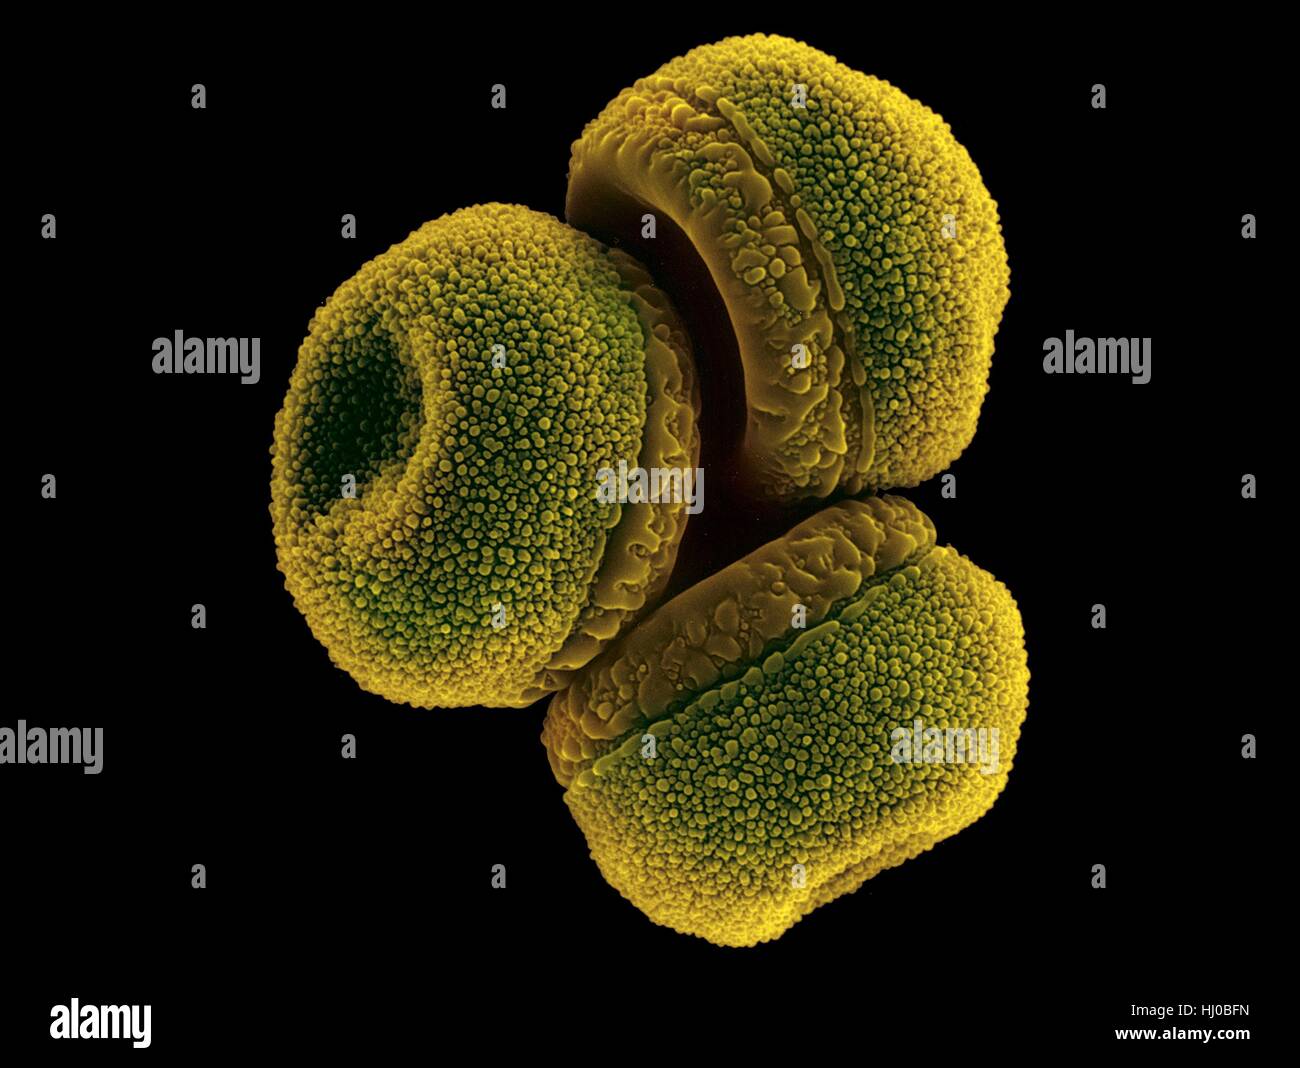 Waterlily pollen (Nymphaea mexicana),coloured scanning electron micrograph (SEM).Nymphaea mexicana is species of aquatic plant in family Nymphaeaceae.It is native to Southern United States Mexico.Common names include: yellow waterlily,Mexican waterlily banana waterlily.Nymphaea mexicana is best Stock Photo